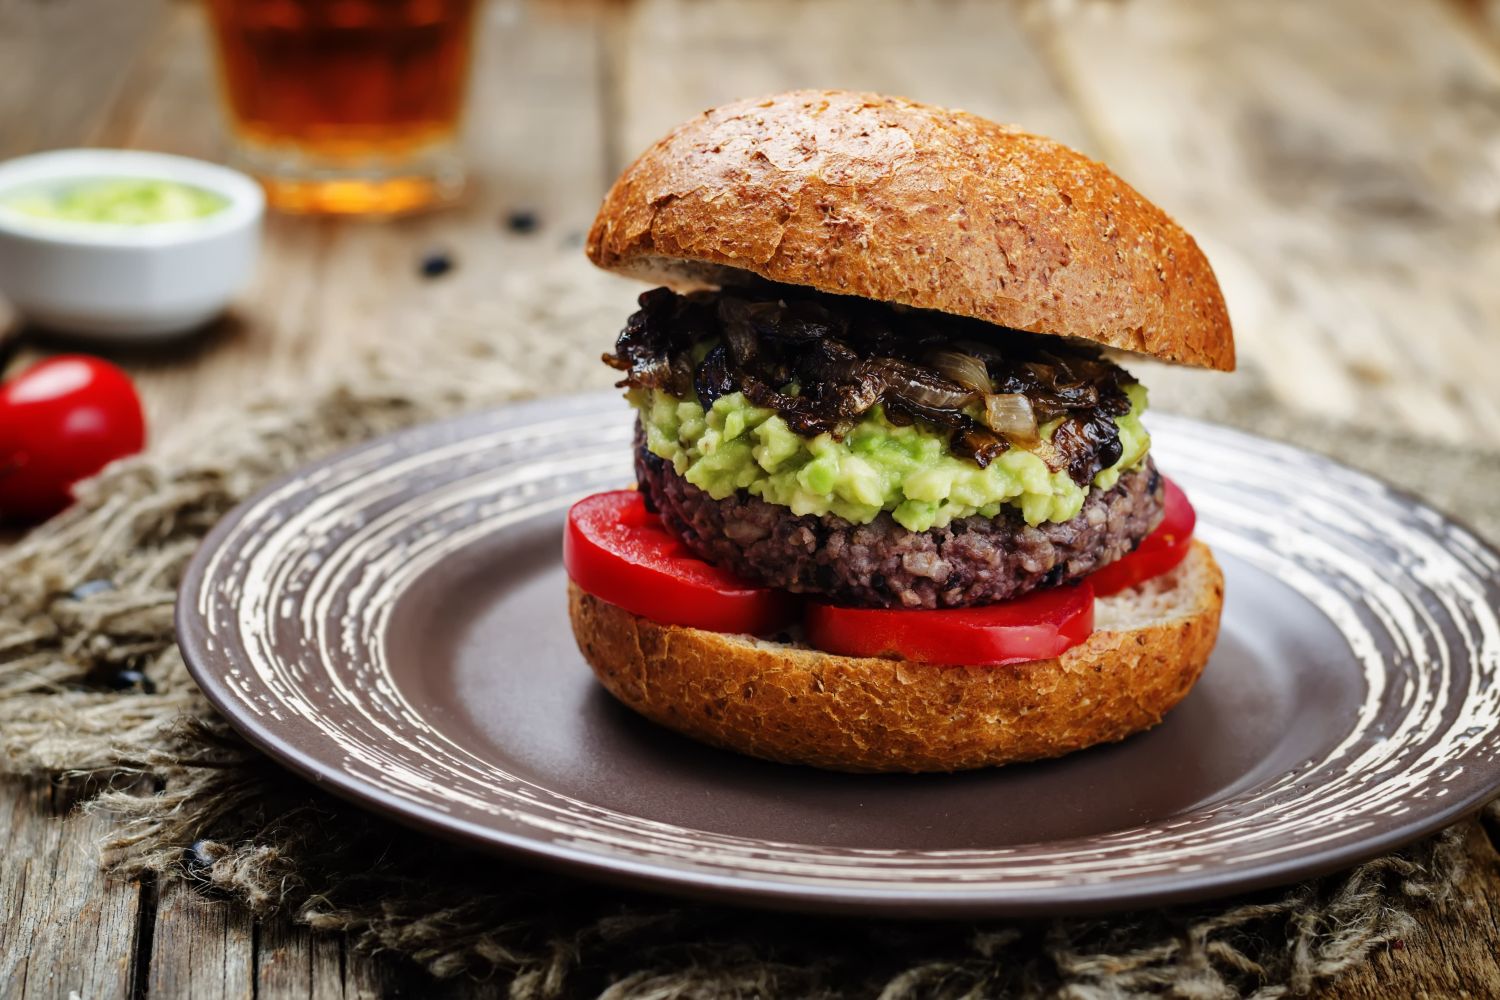 Salsa Black bean burgers with avocado, tomatoes, and onions on a bun. 